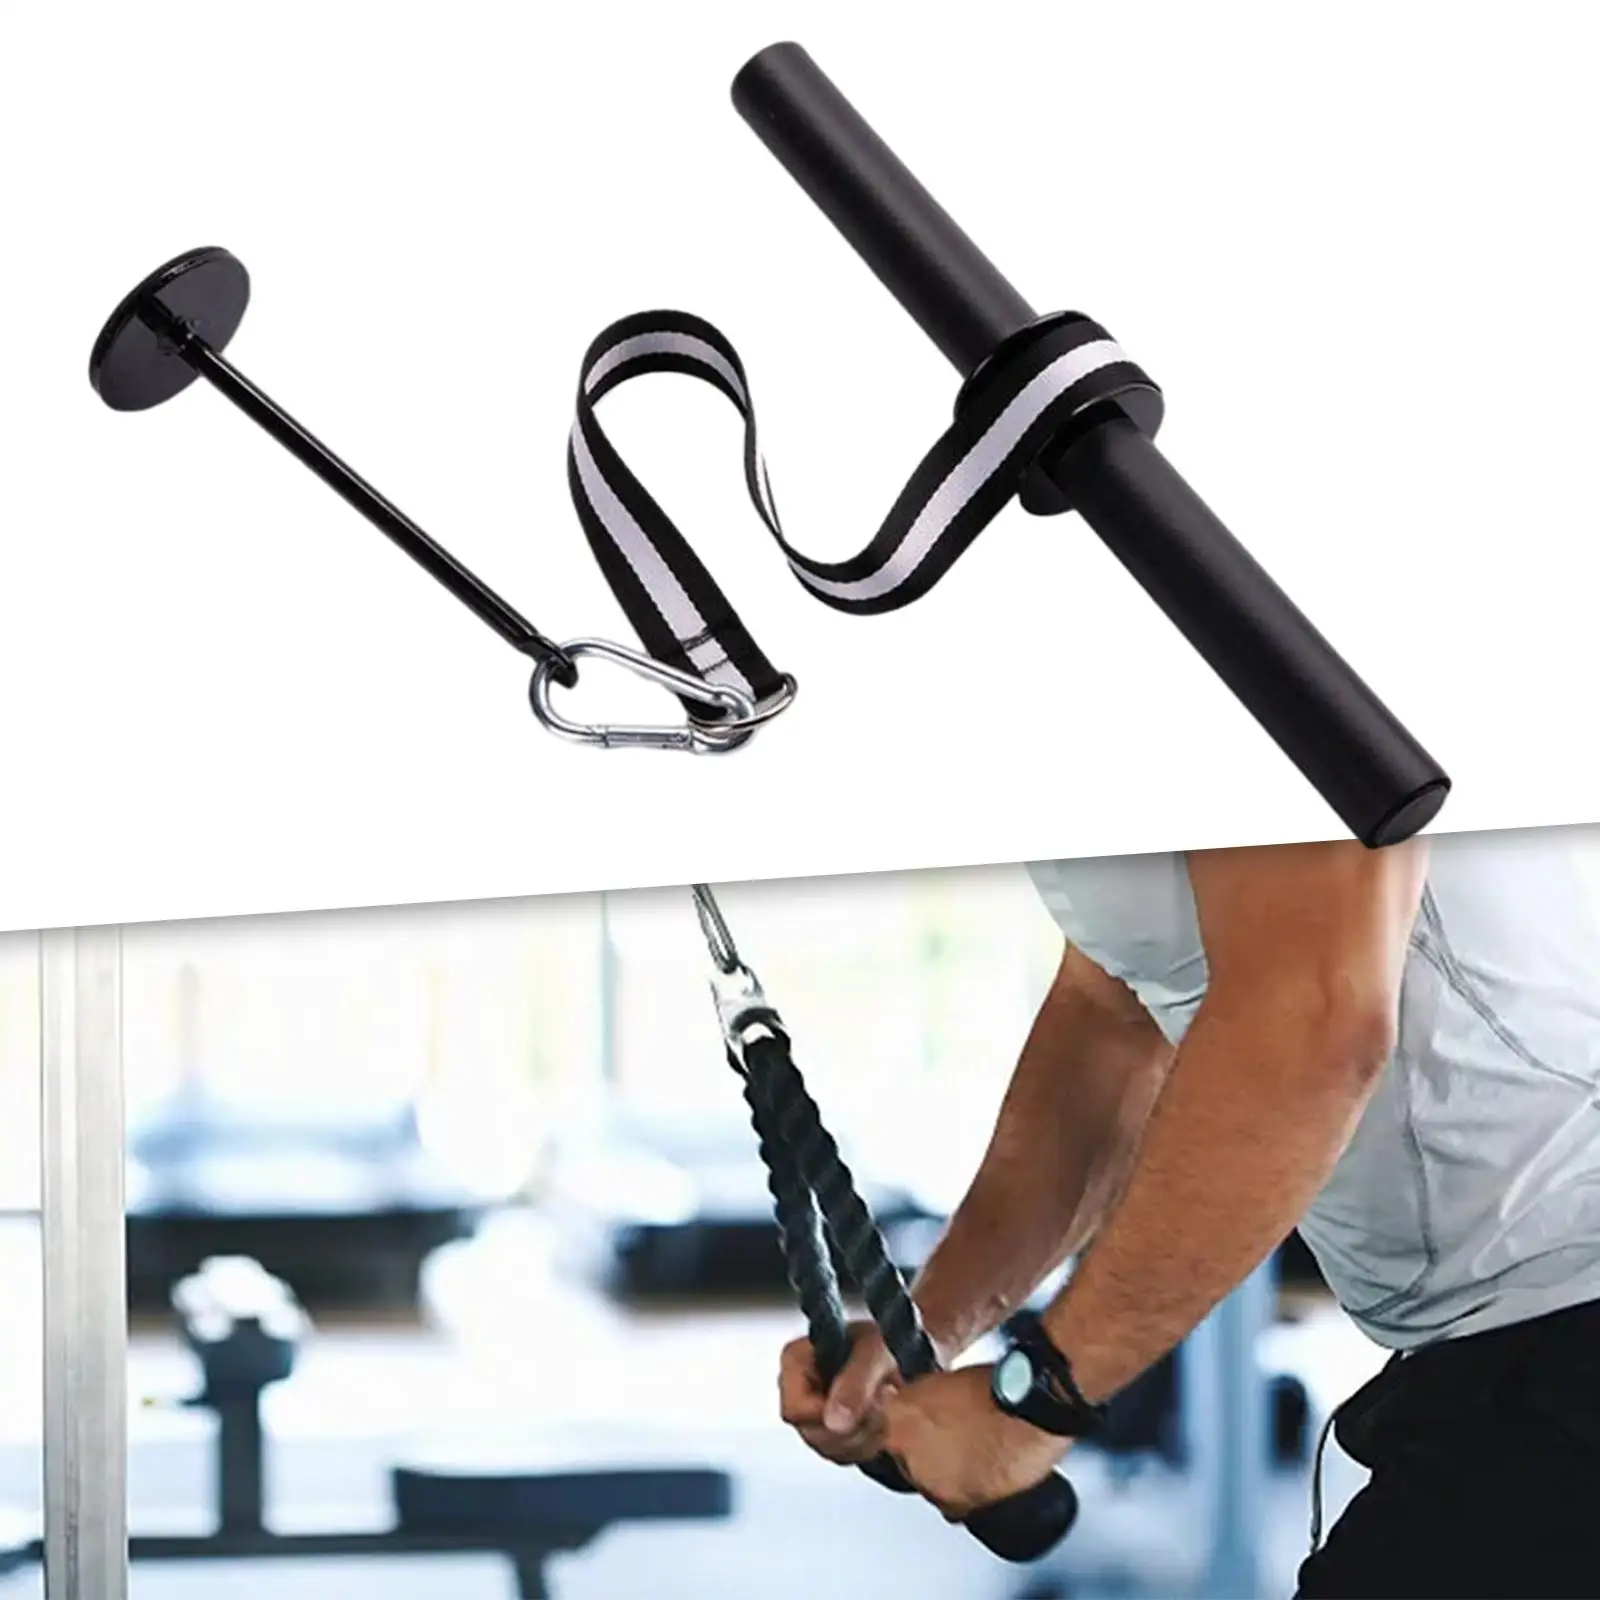 Wrist and Forearm Blaster Wrist Roller Trainer Strength Training Wrist and Forearm Strengthener for Arm Strength Training